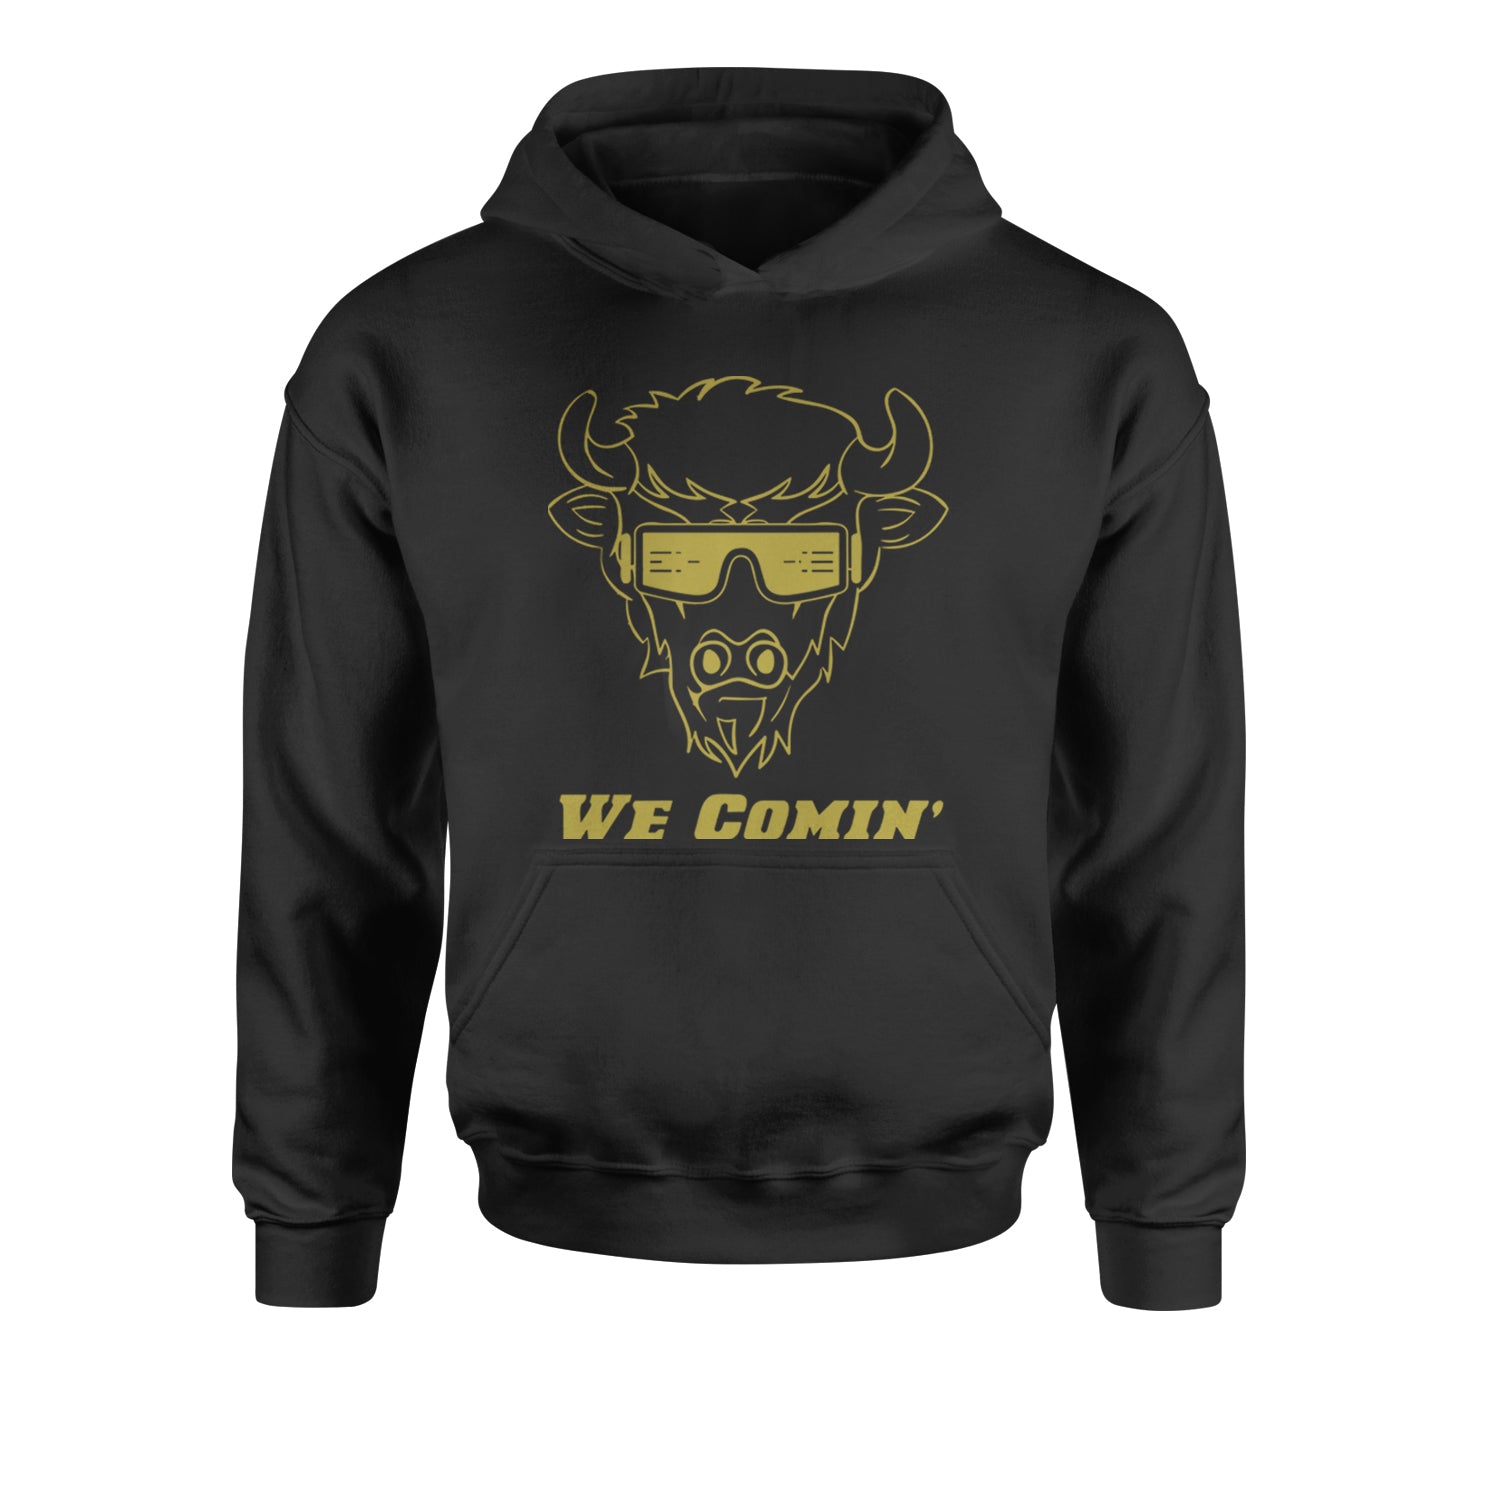 We Coming Coach Prime Colorado Youth-Sized Hoodie